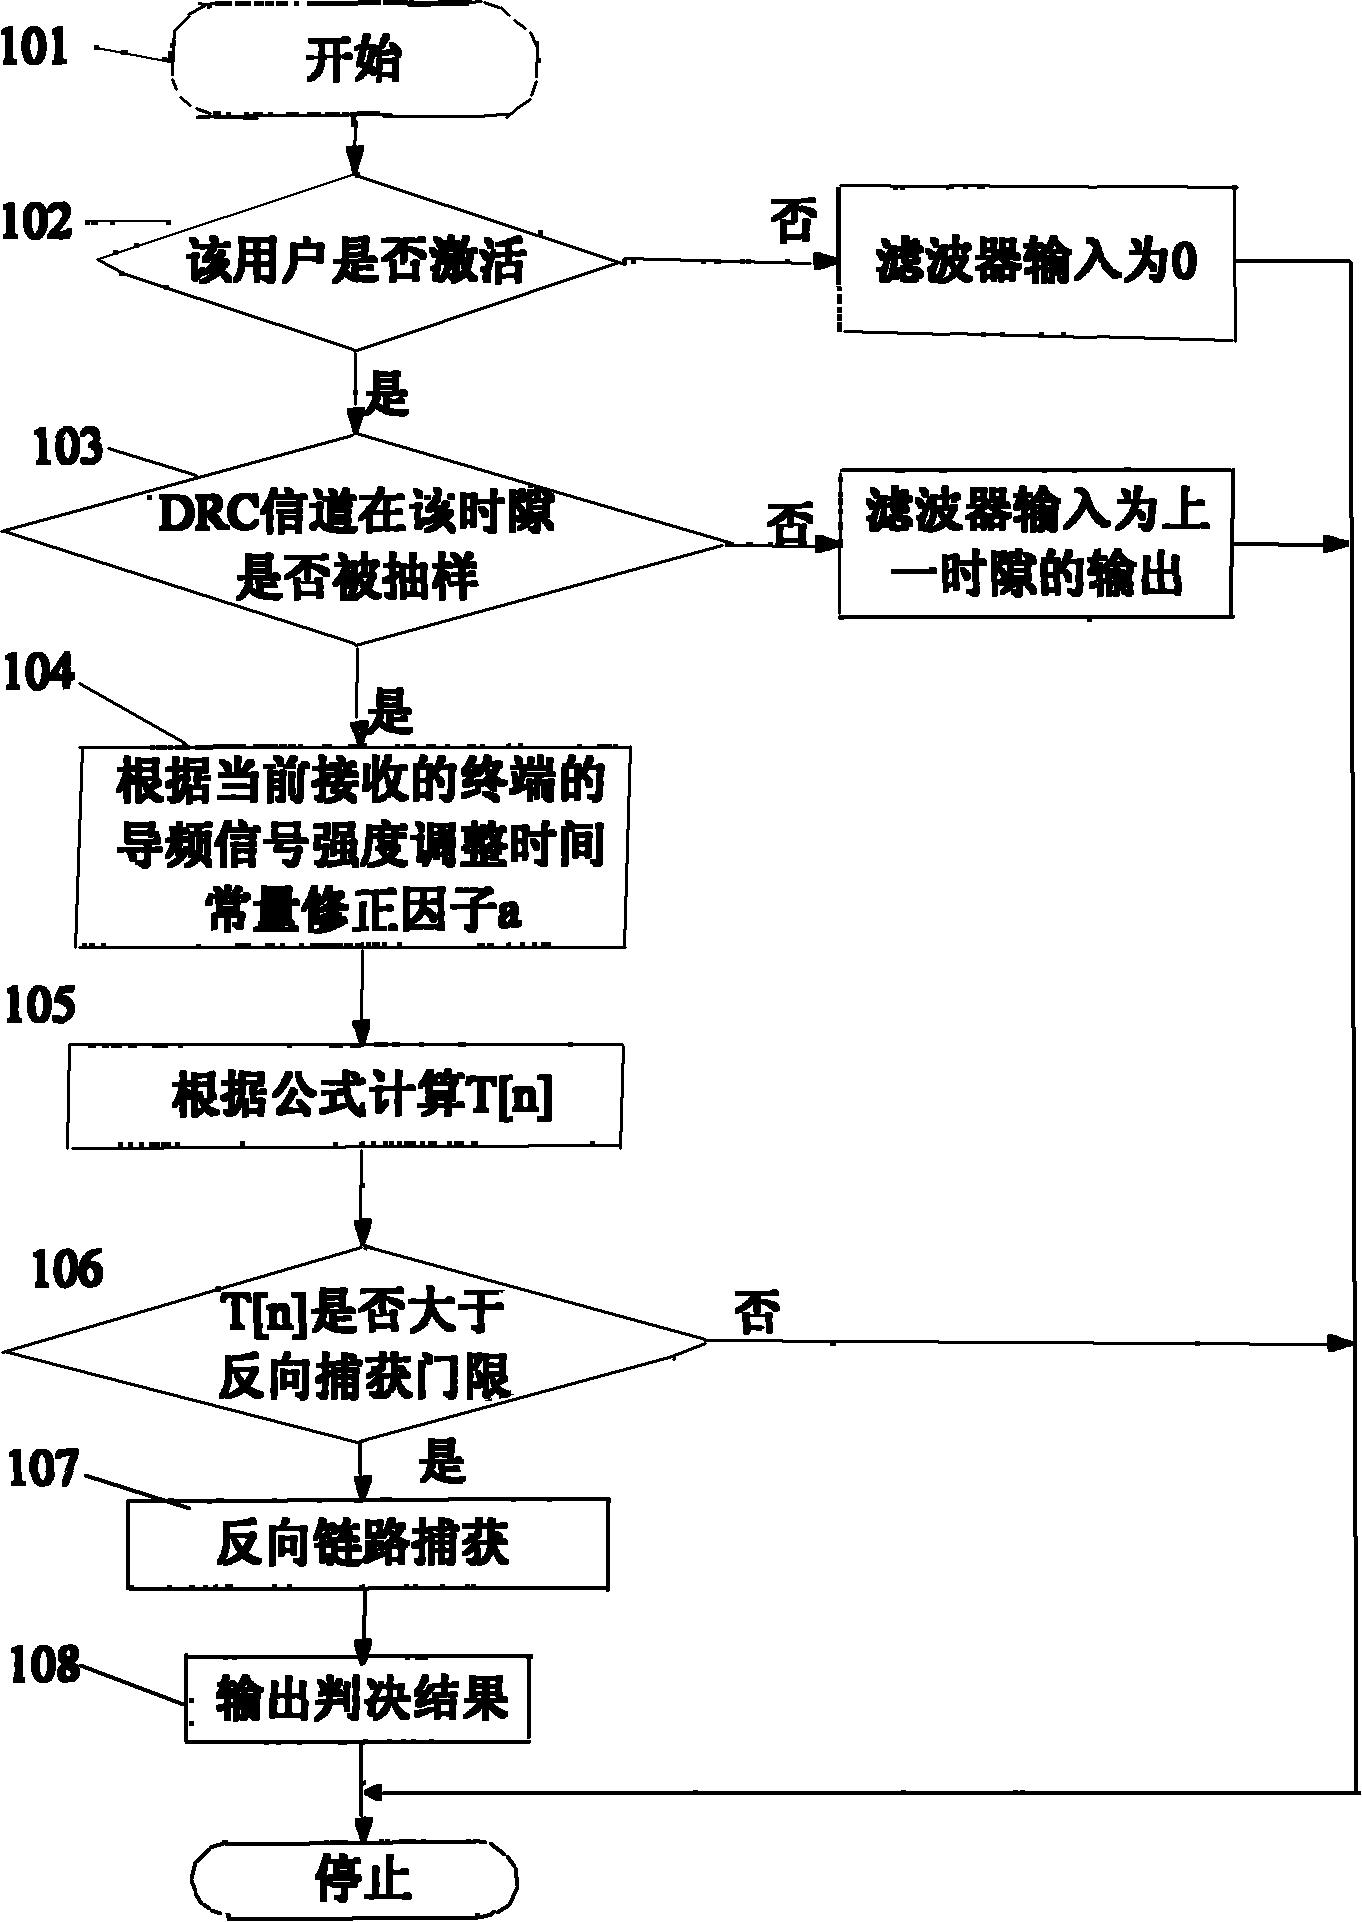 Inverse link catching method in mobile communication system